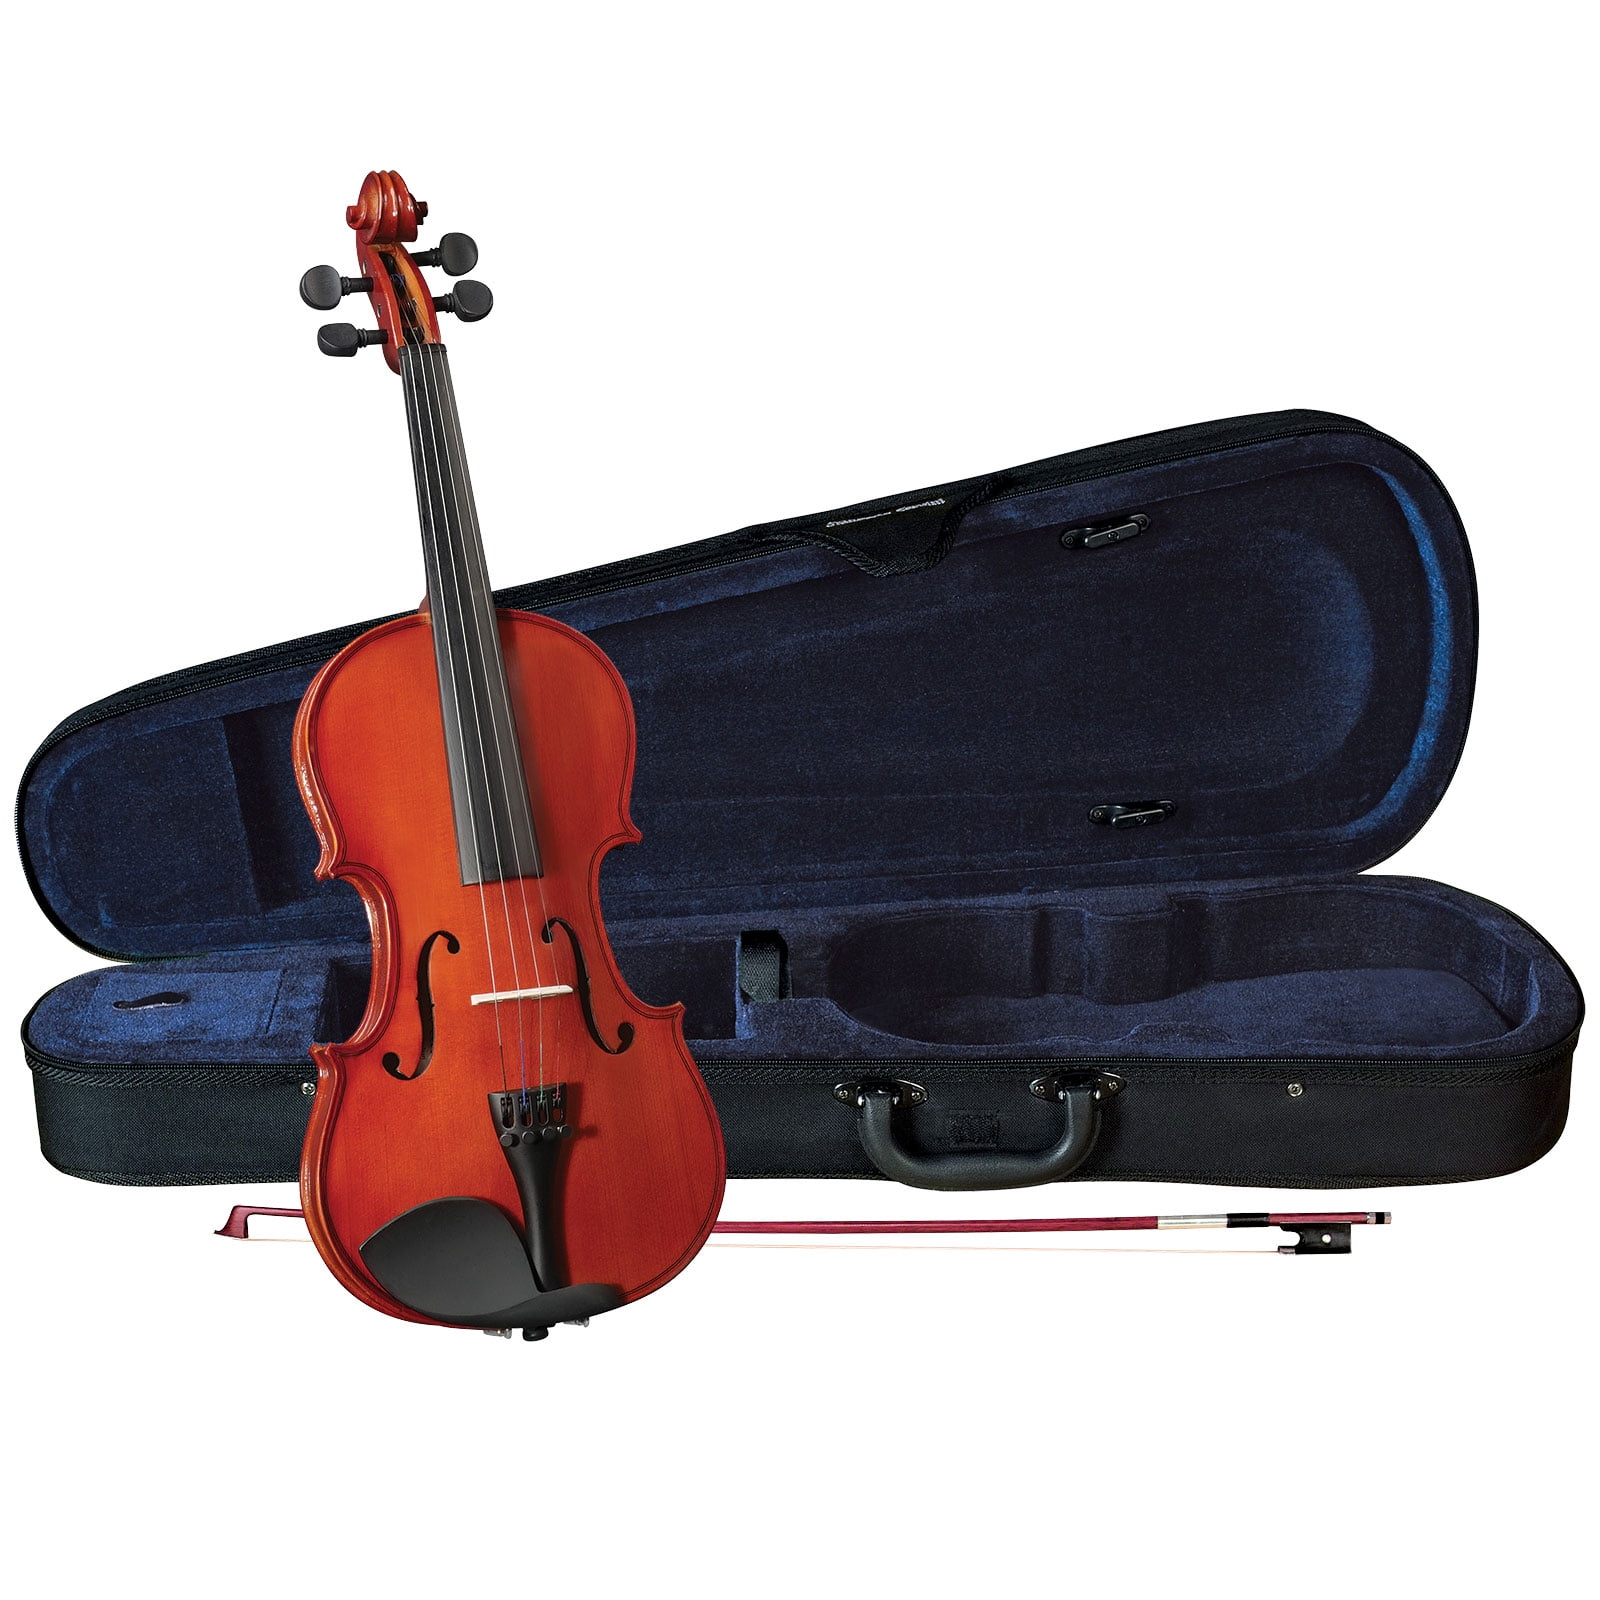 ST-RISE-VFLAME-3/4 Rise by Sawtooth 3/4 Size Beginners Violin with Flame Maple Back 